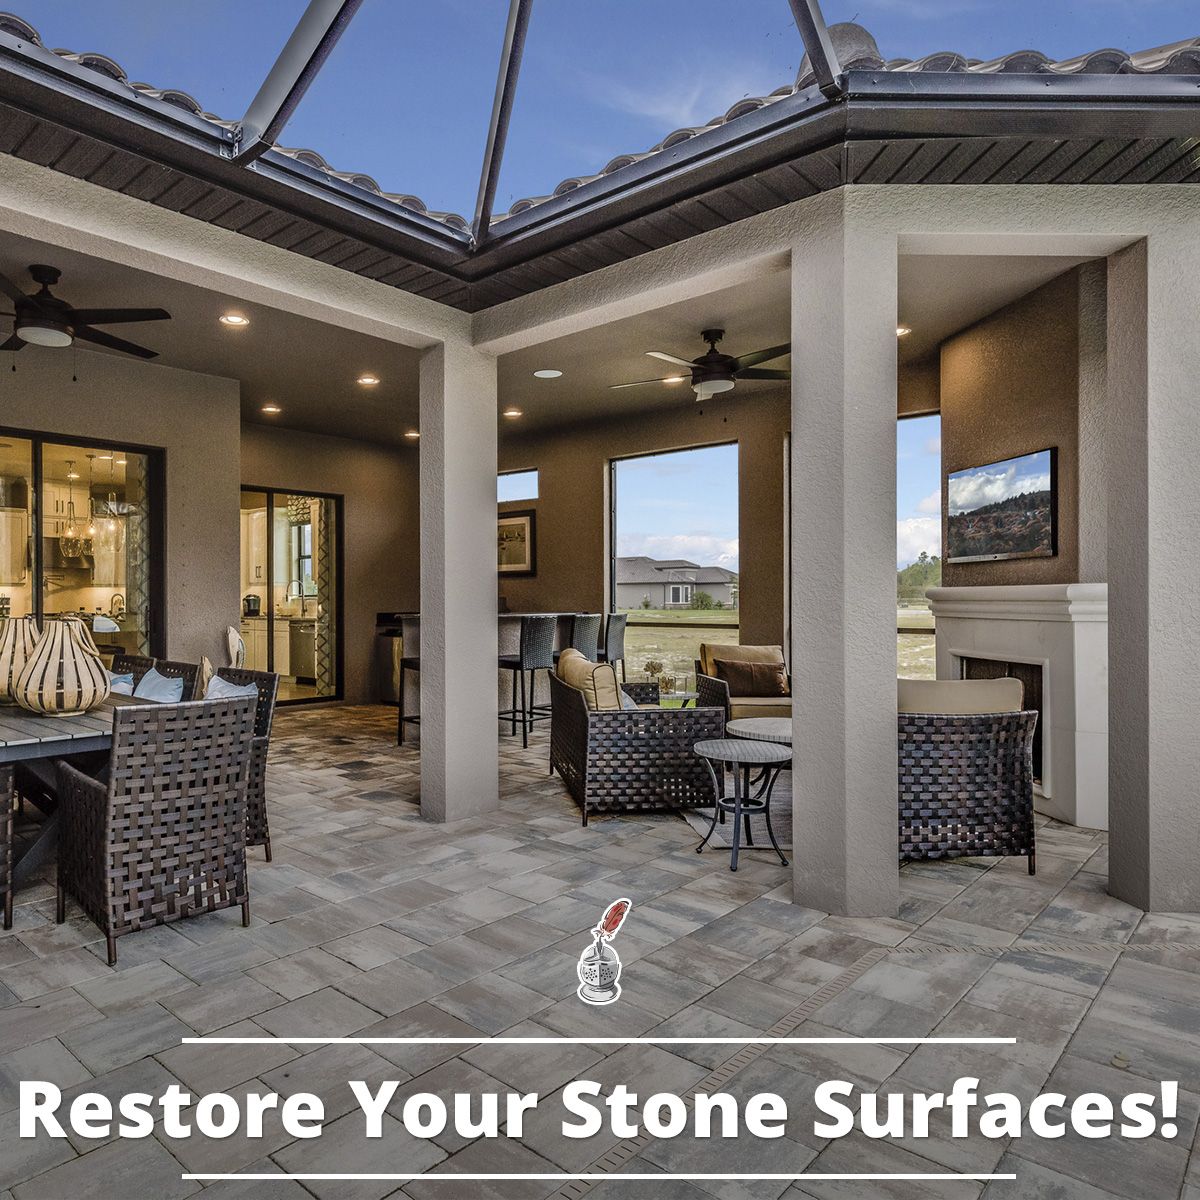 Restore Your Stone Surfaces!